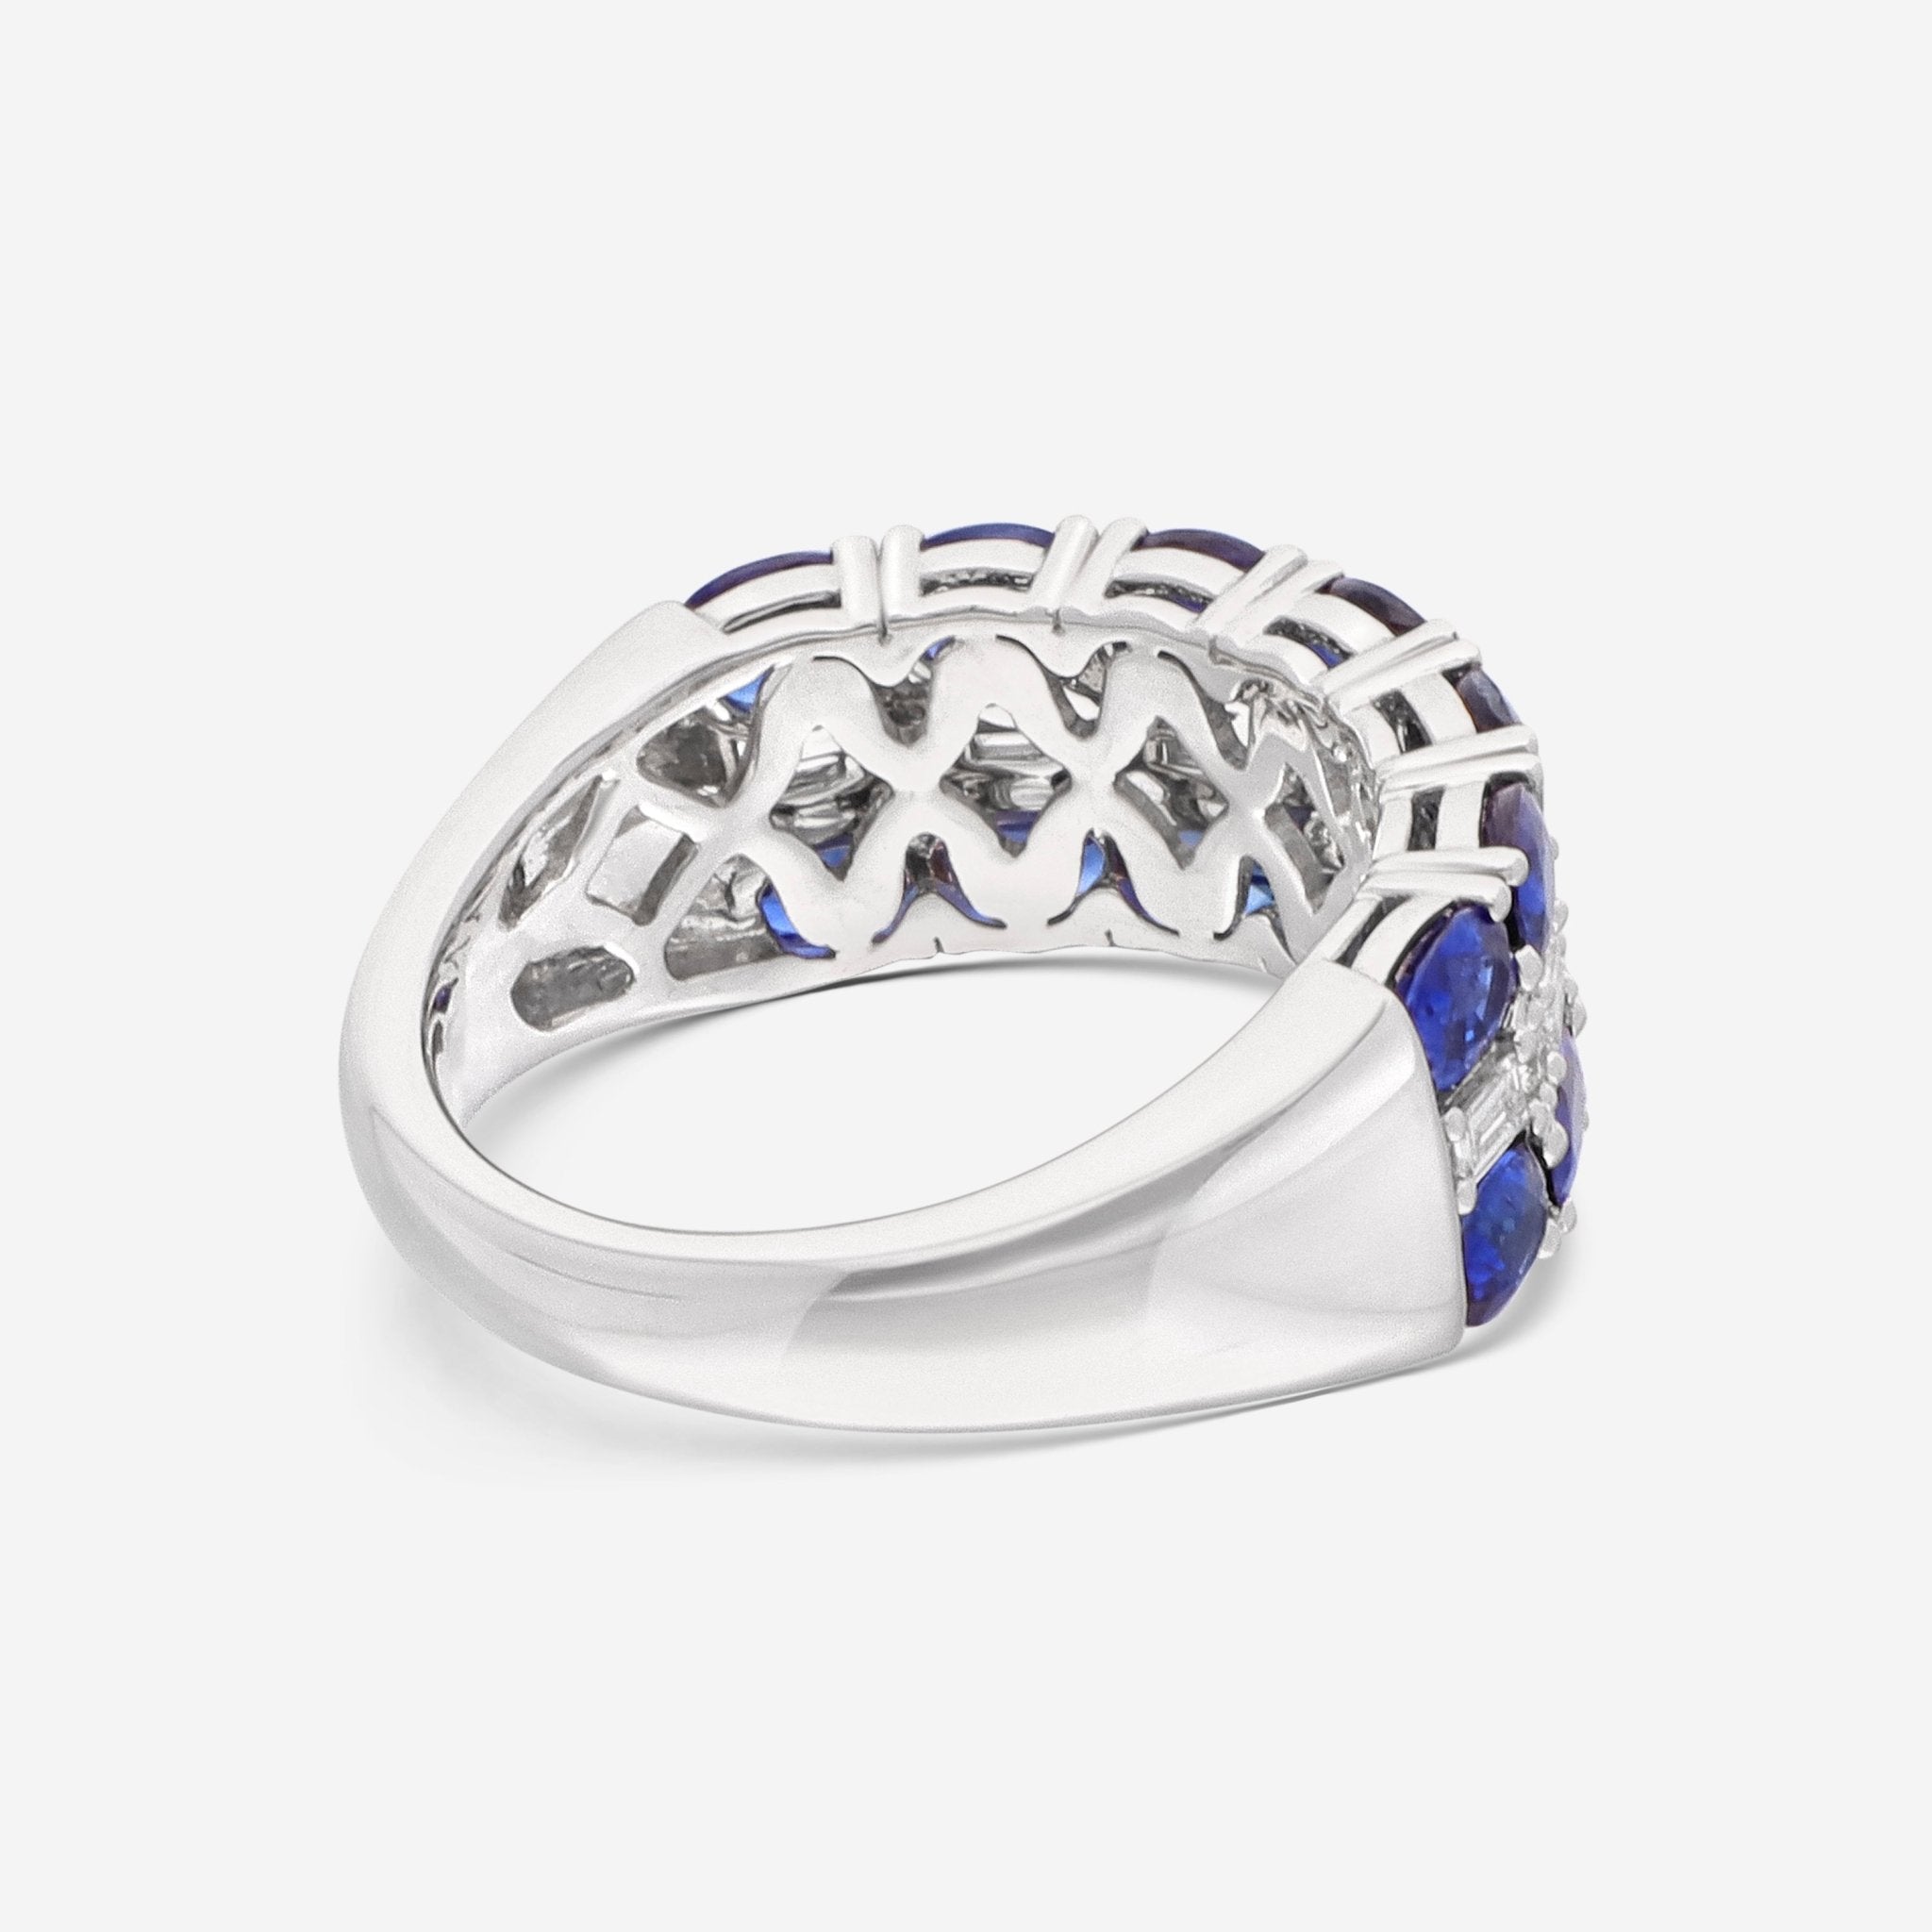 Ina Mar 14K White Gold Three Row 0.31ct.tw Diamonds and 3.17ct.tw Blue Sapphire Ring IMKGK41 - THE SOLIST - Ina Mar